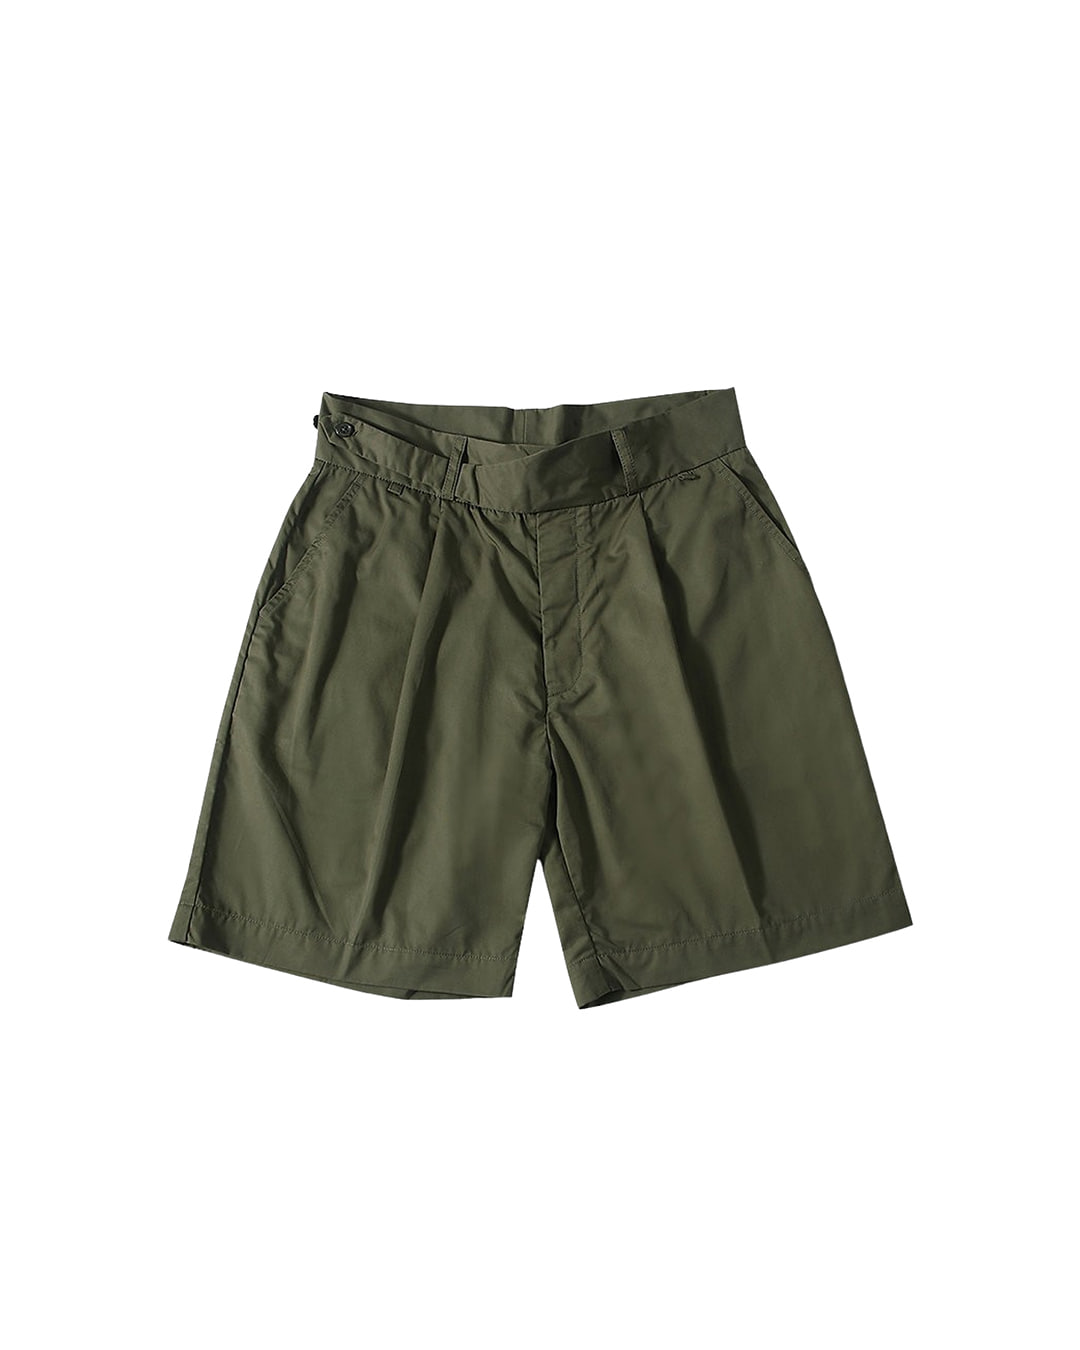 SIDE BUTTON SHORTS (olive green)